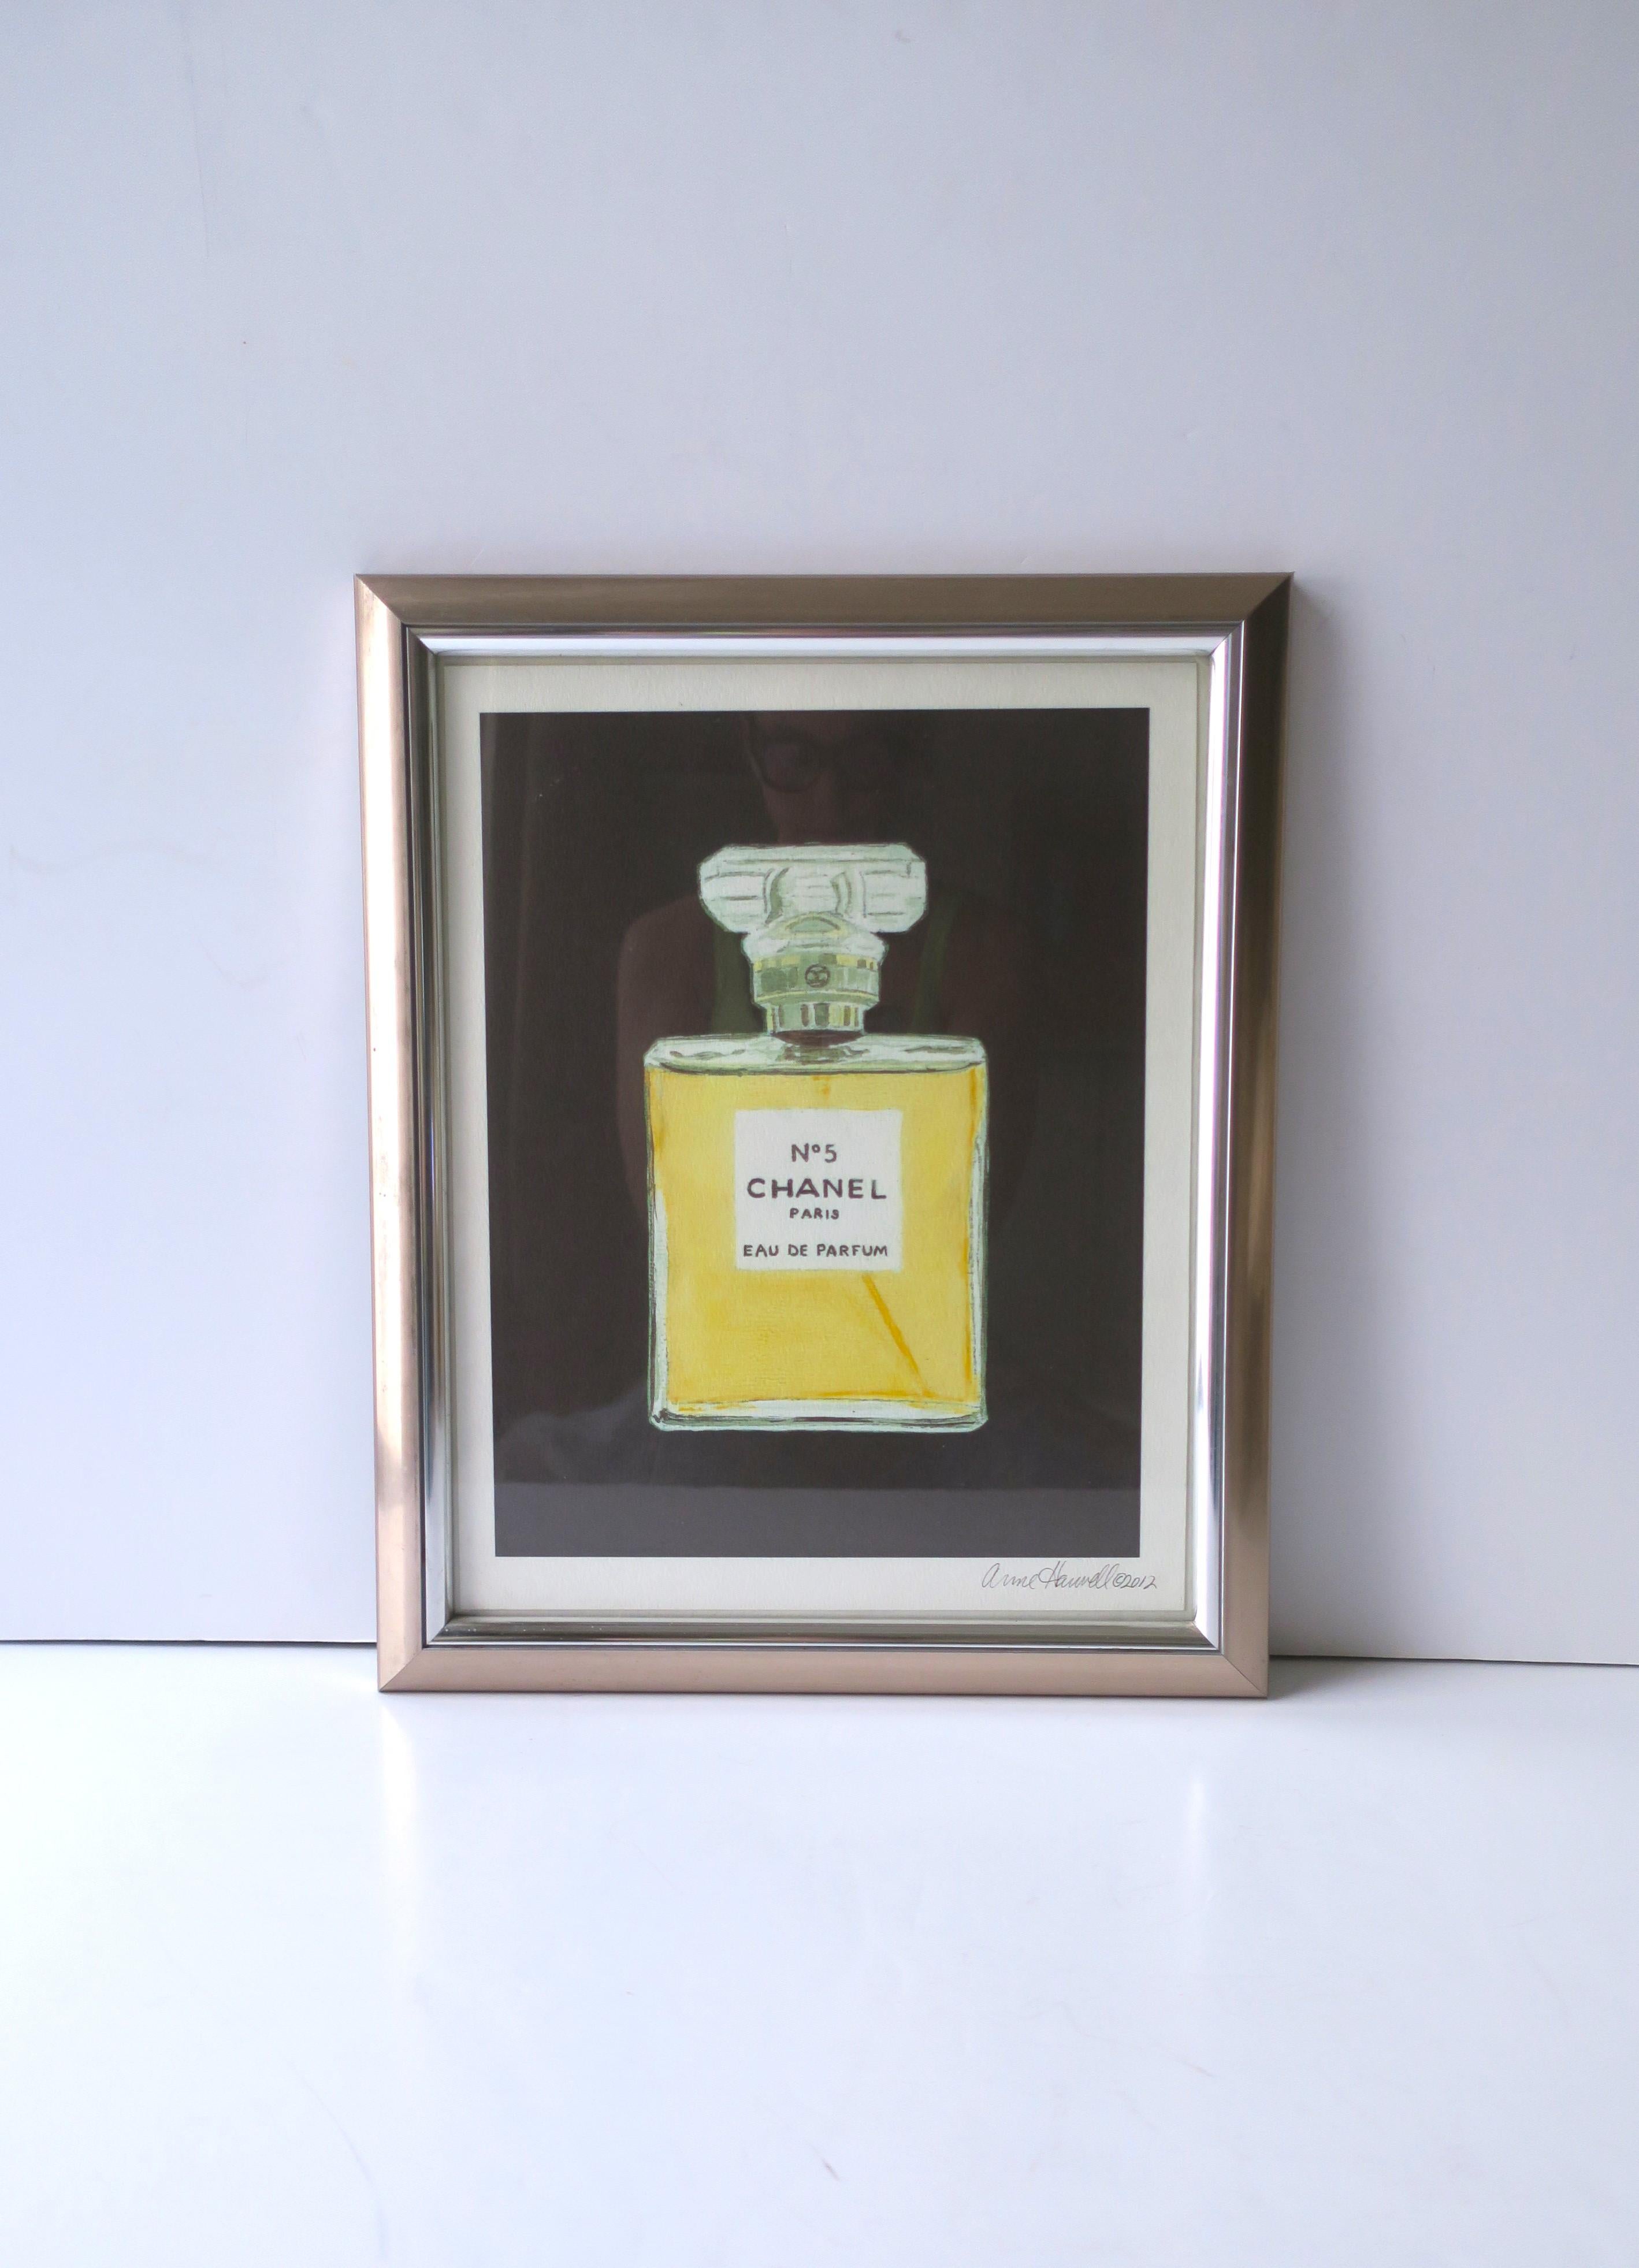 A beautiful watercolor painting of the iconic Chanel No. 5 perfume bottle, signed by artist, 2012, New York, USA. A beautiful and well-done watercolor painting of the iconic Chanel No. 5 parfum bottle, signed by artist lower right-hand corner, dated